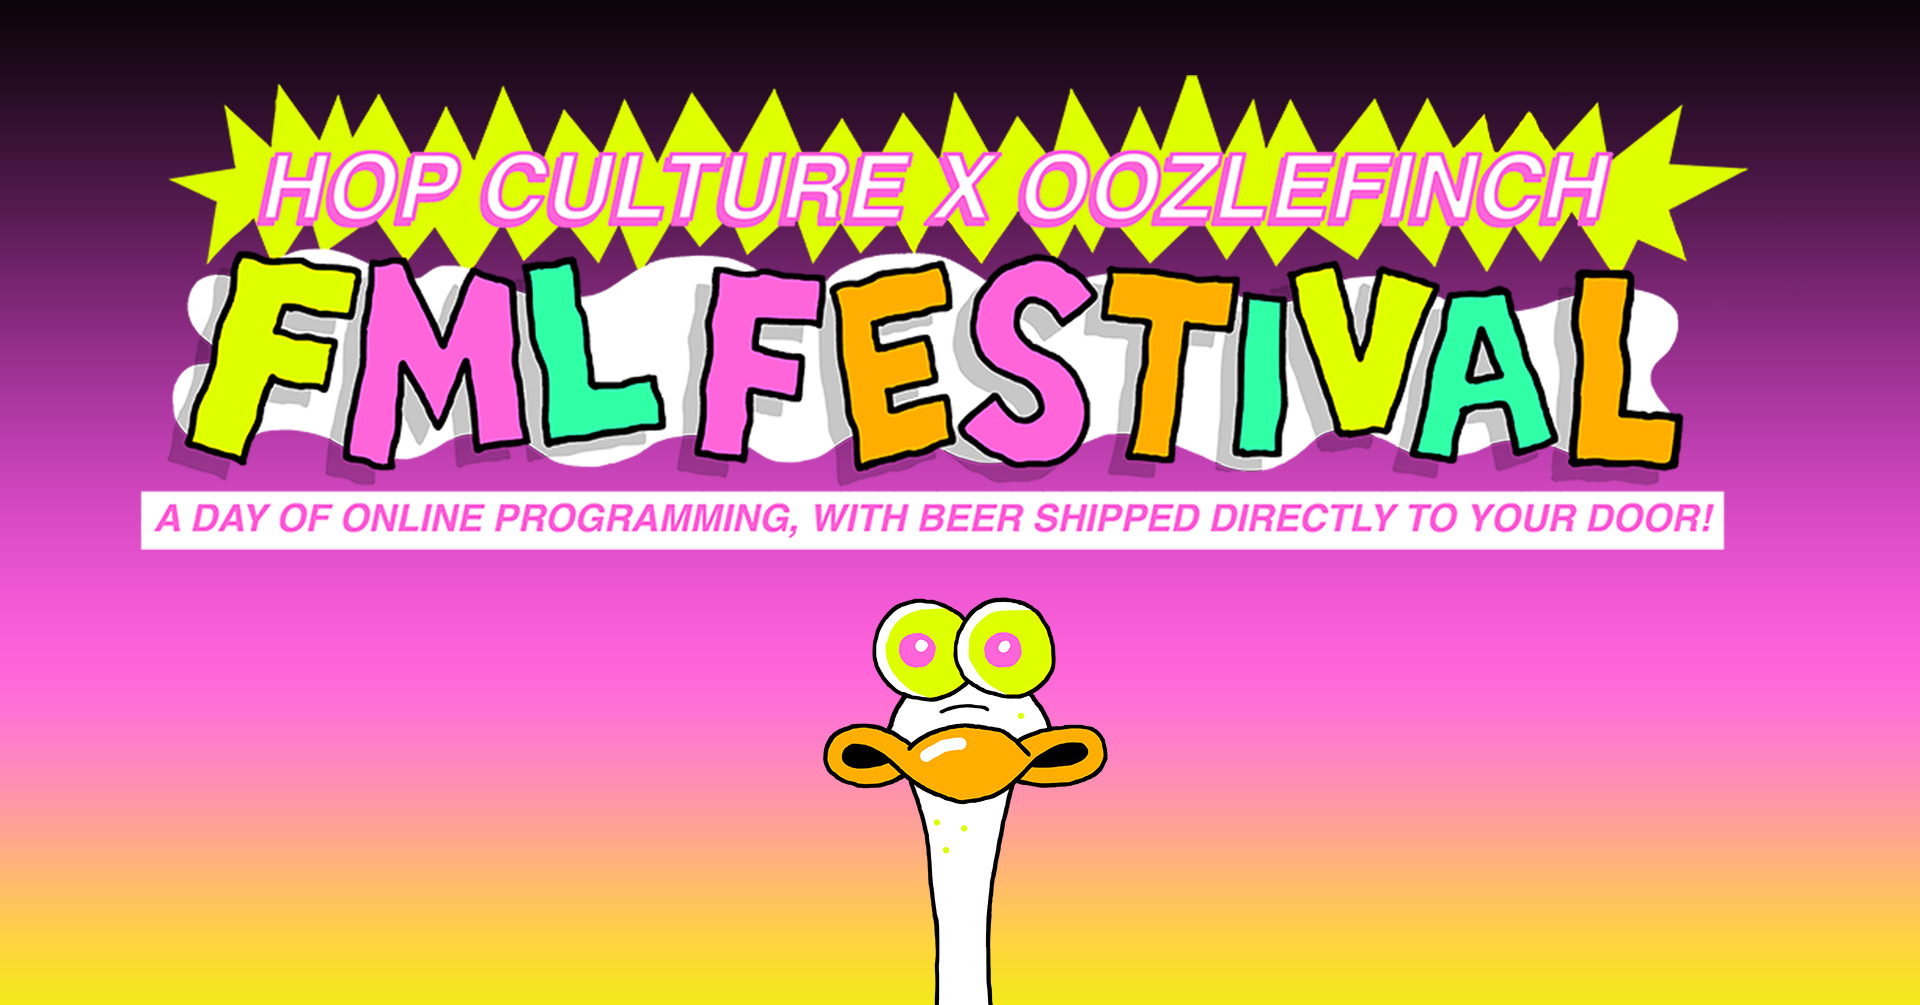 Hop Culture and Oozlefinch Launch FML 2020 Digital Craft Beer Festival